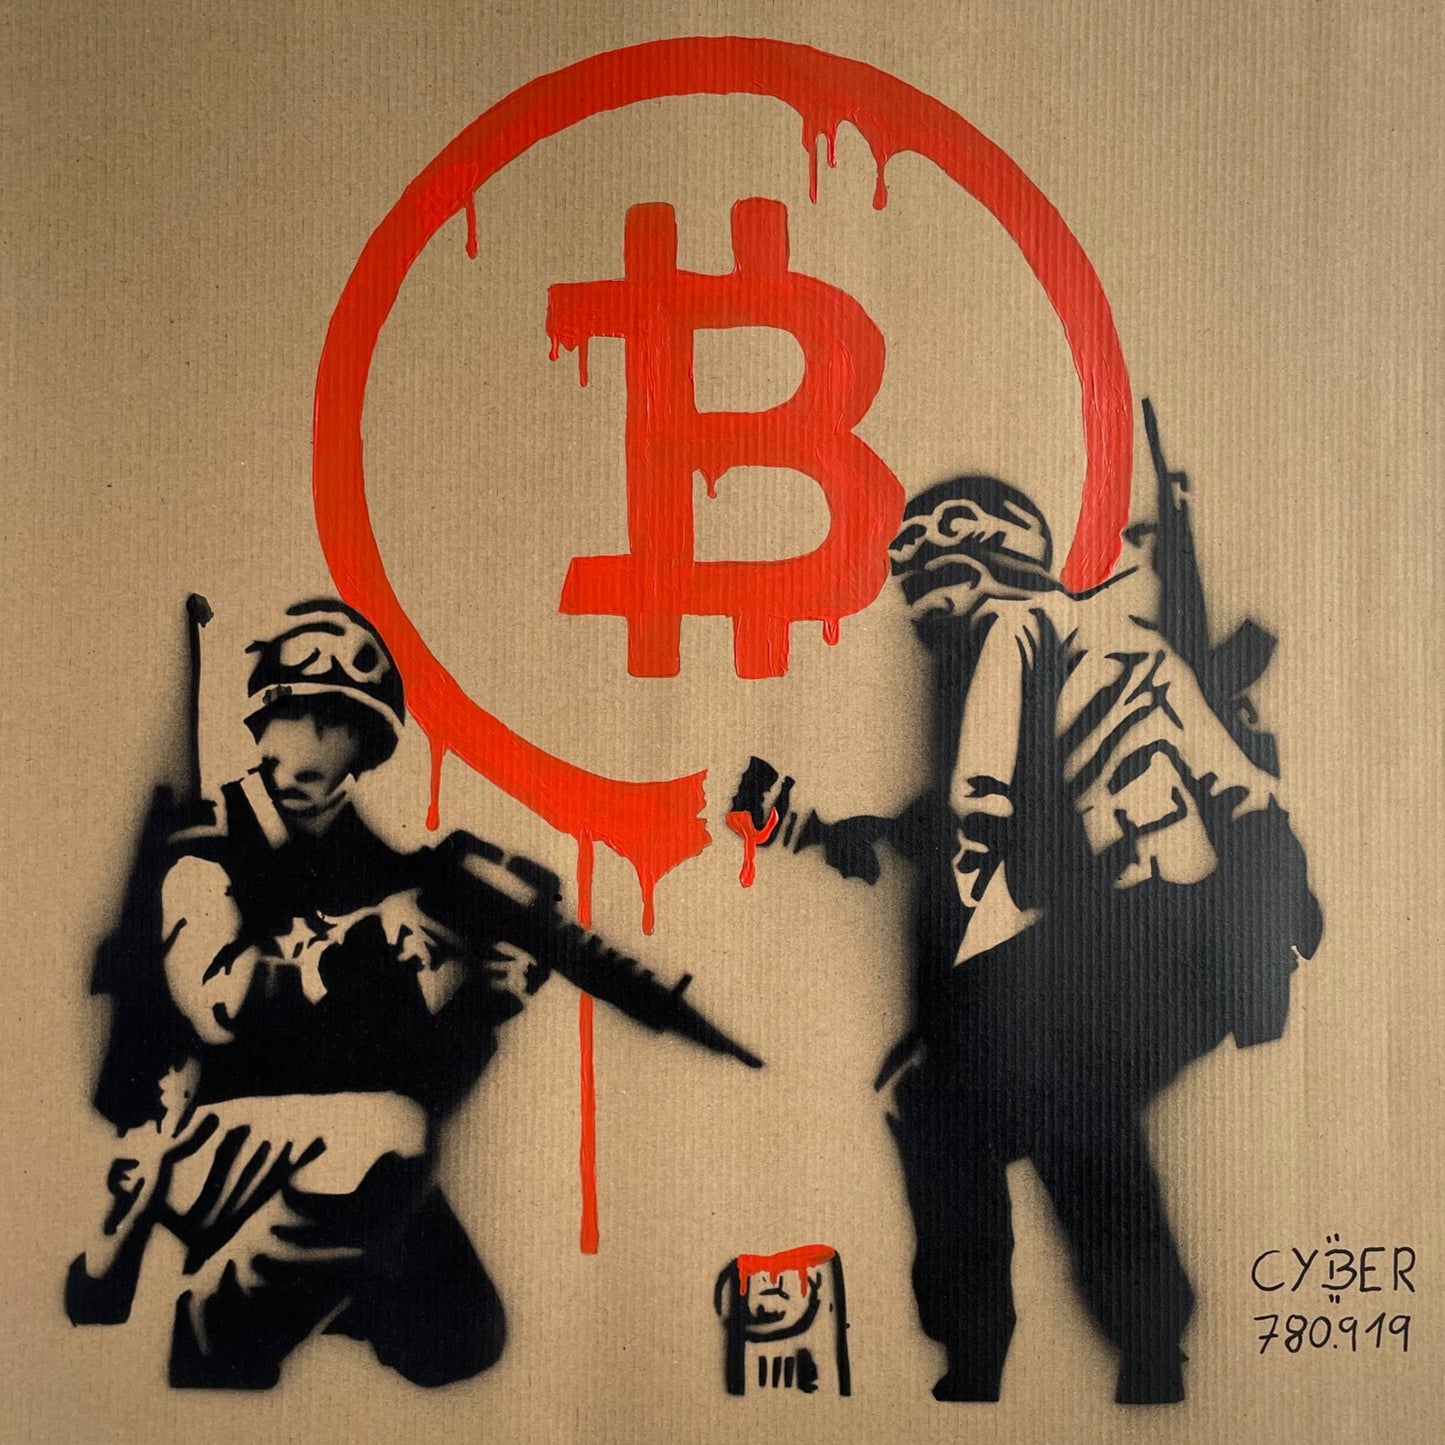 Acrylic and Spray Paint on Cardboard "Make war unaffordable"